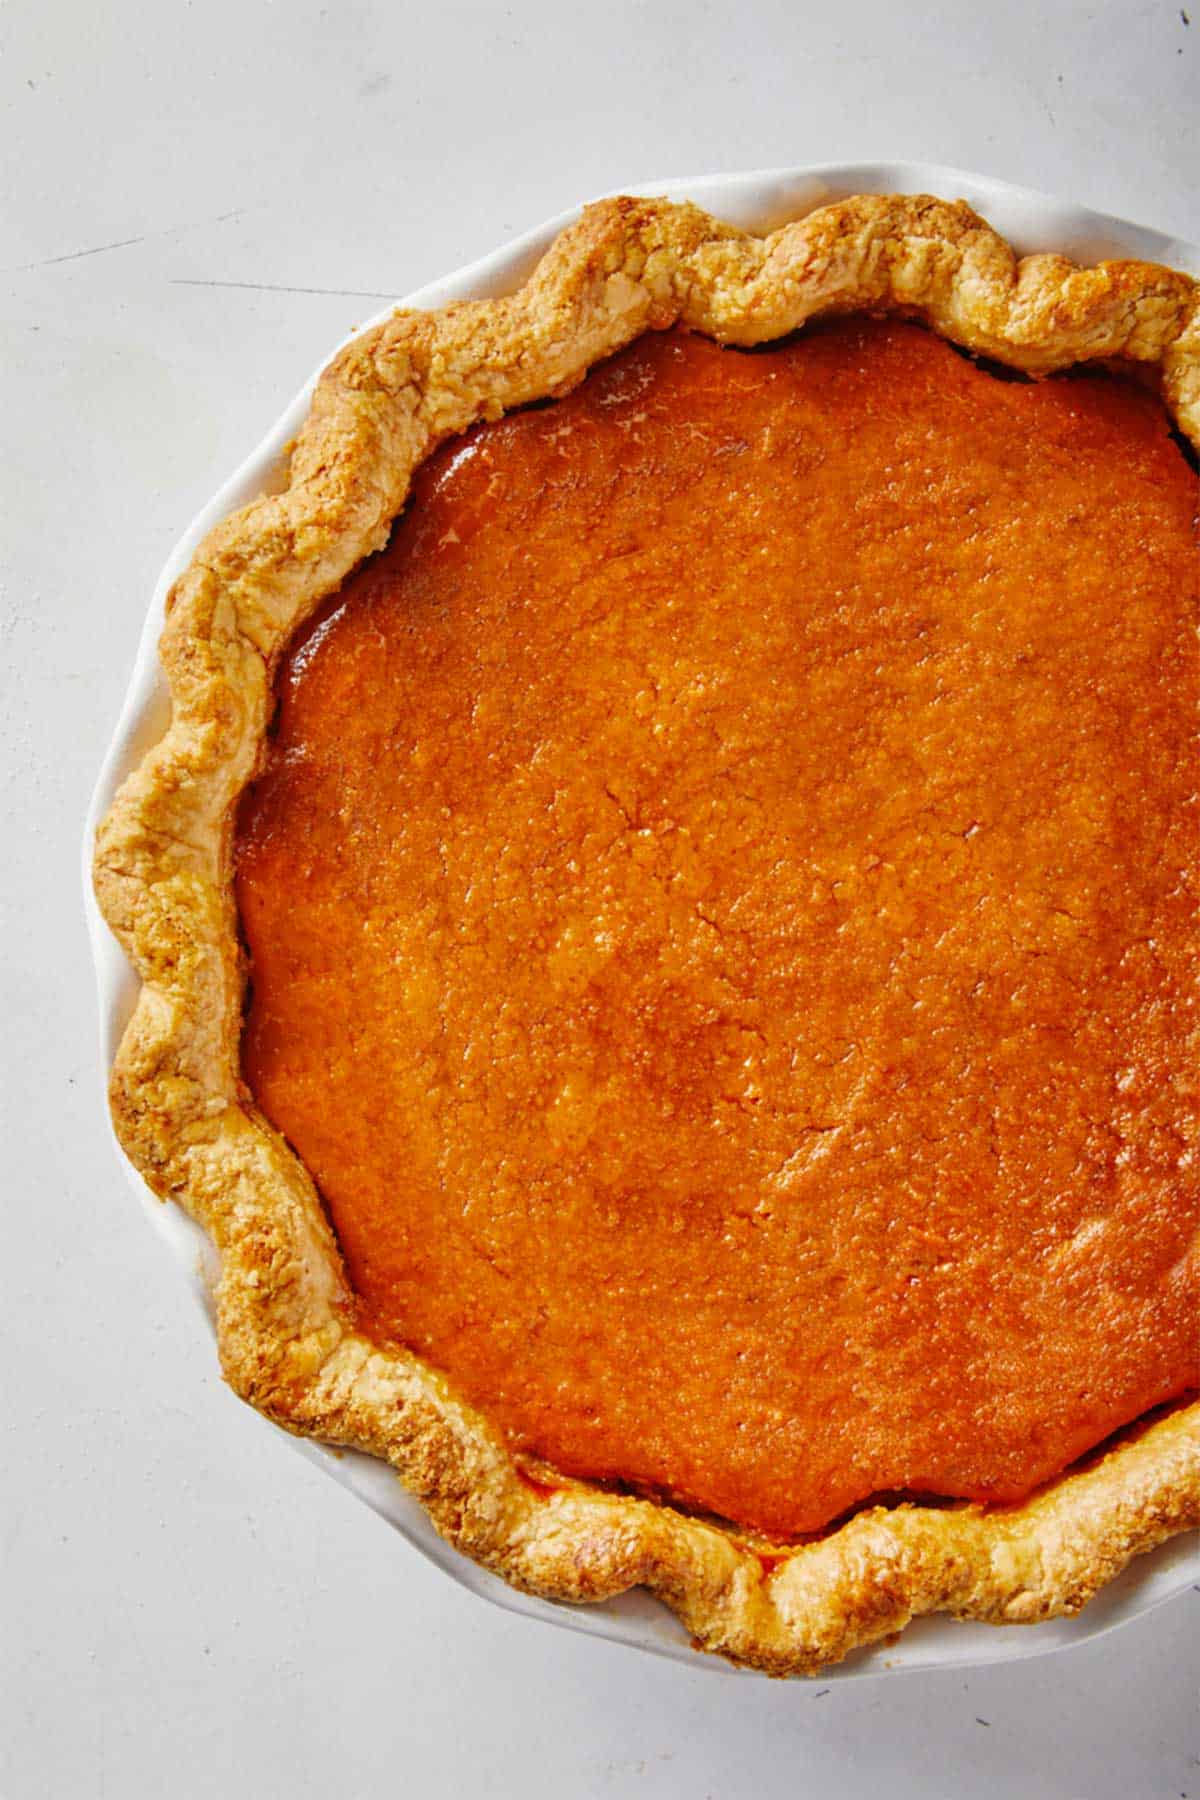 A sweet potato pie on the table after baking.